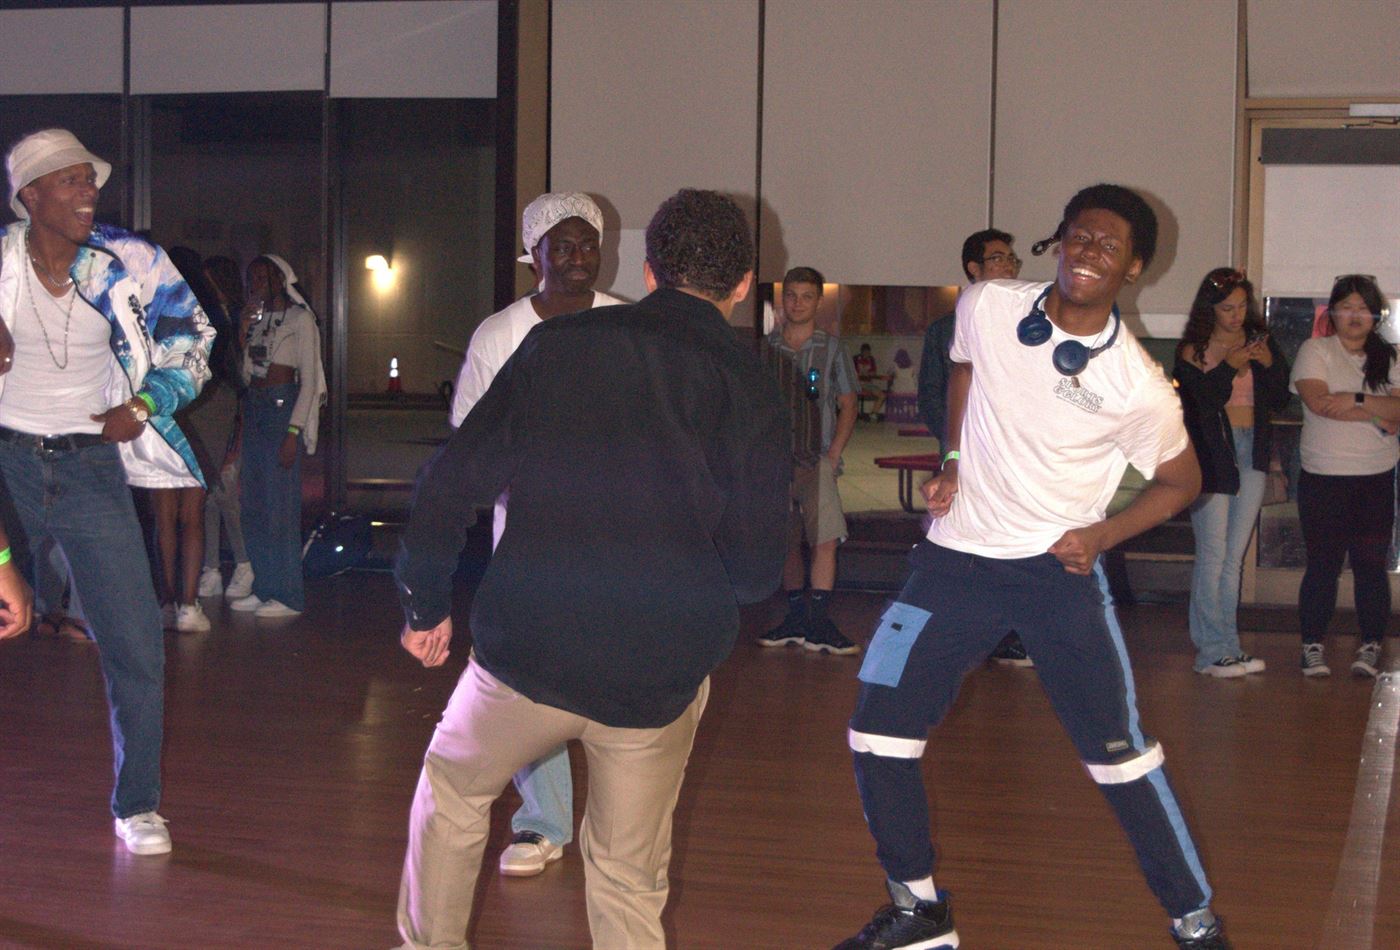 Tyler Tavernier (right) and friends dancing on the dance floor. Photo courtesy of Arely Reyes.